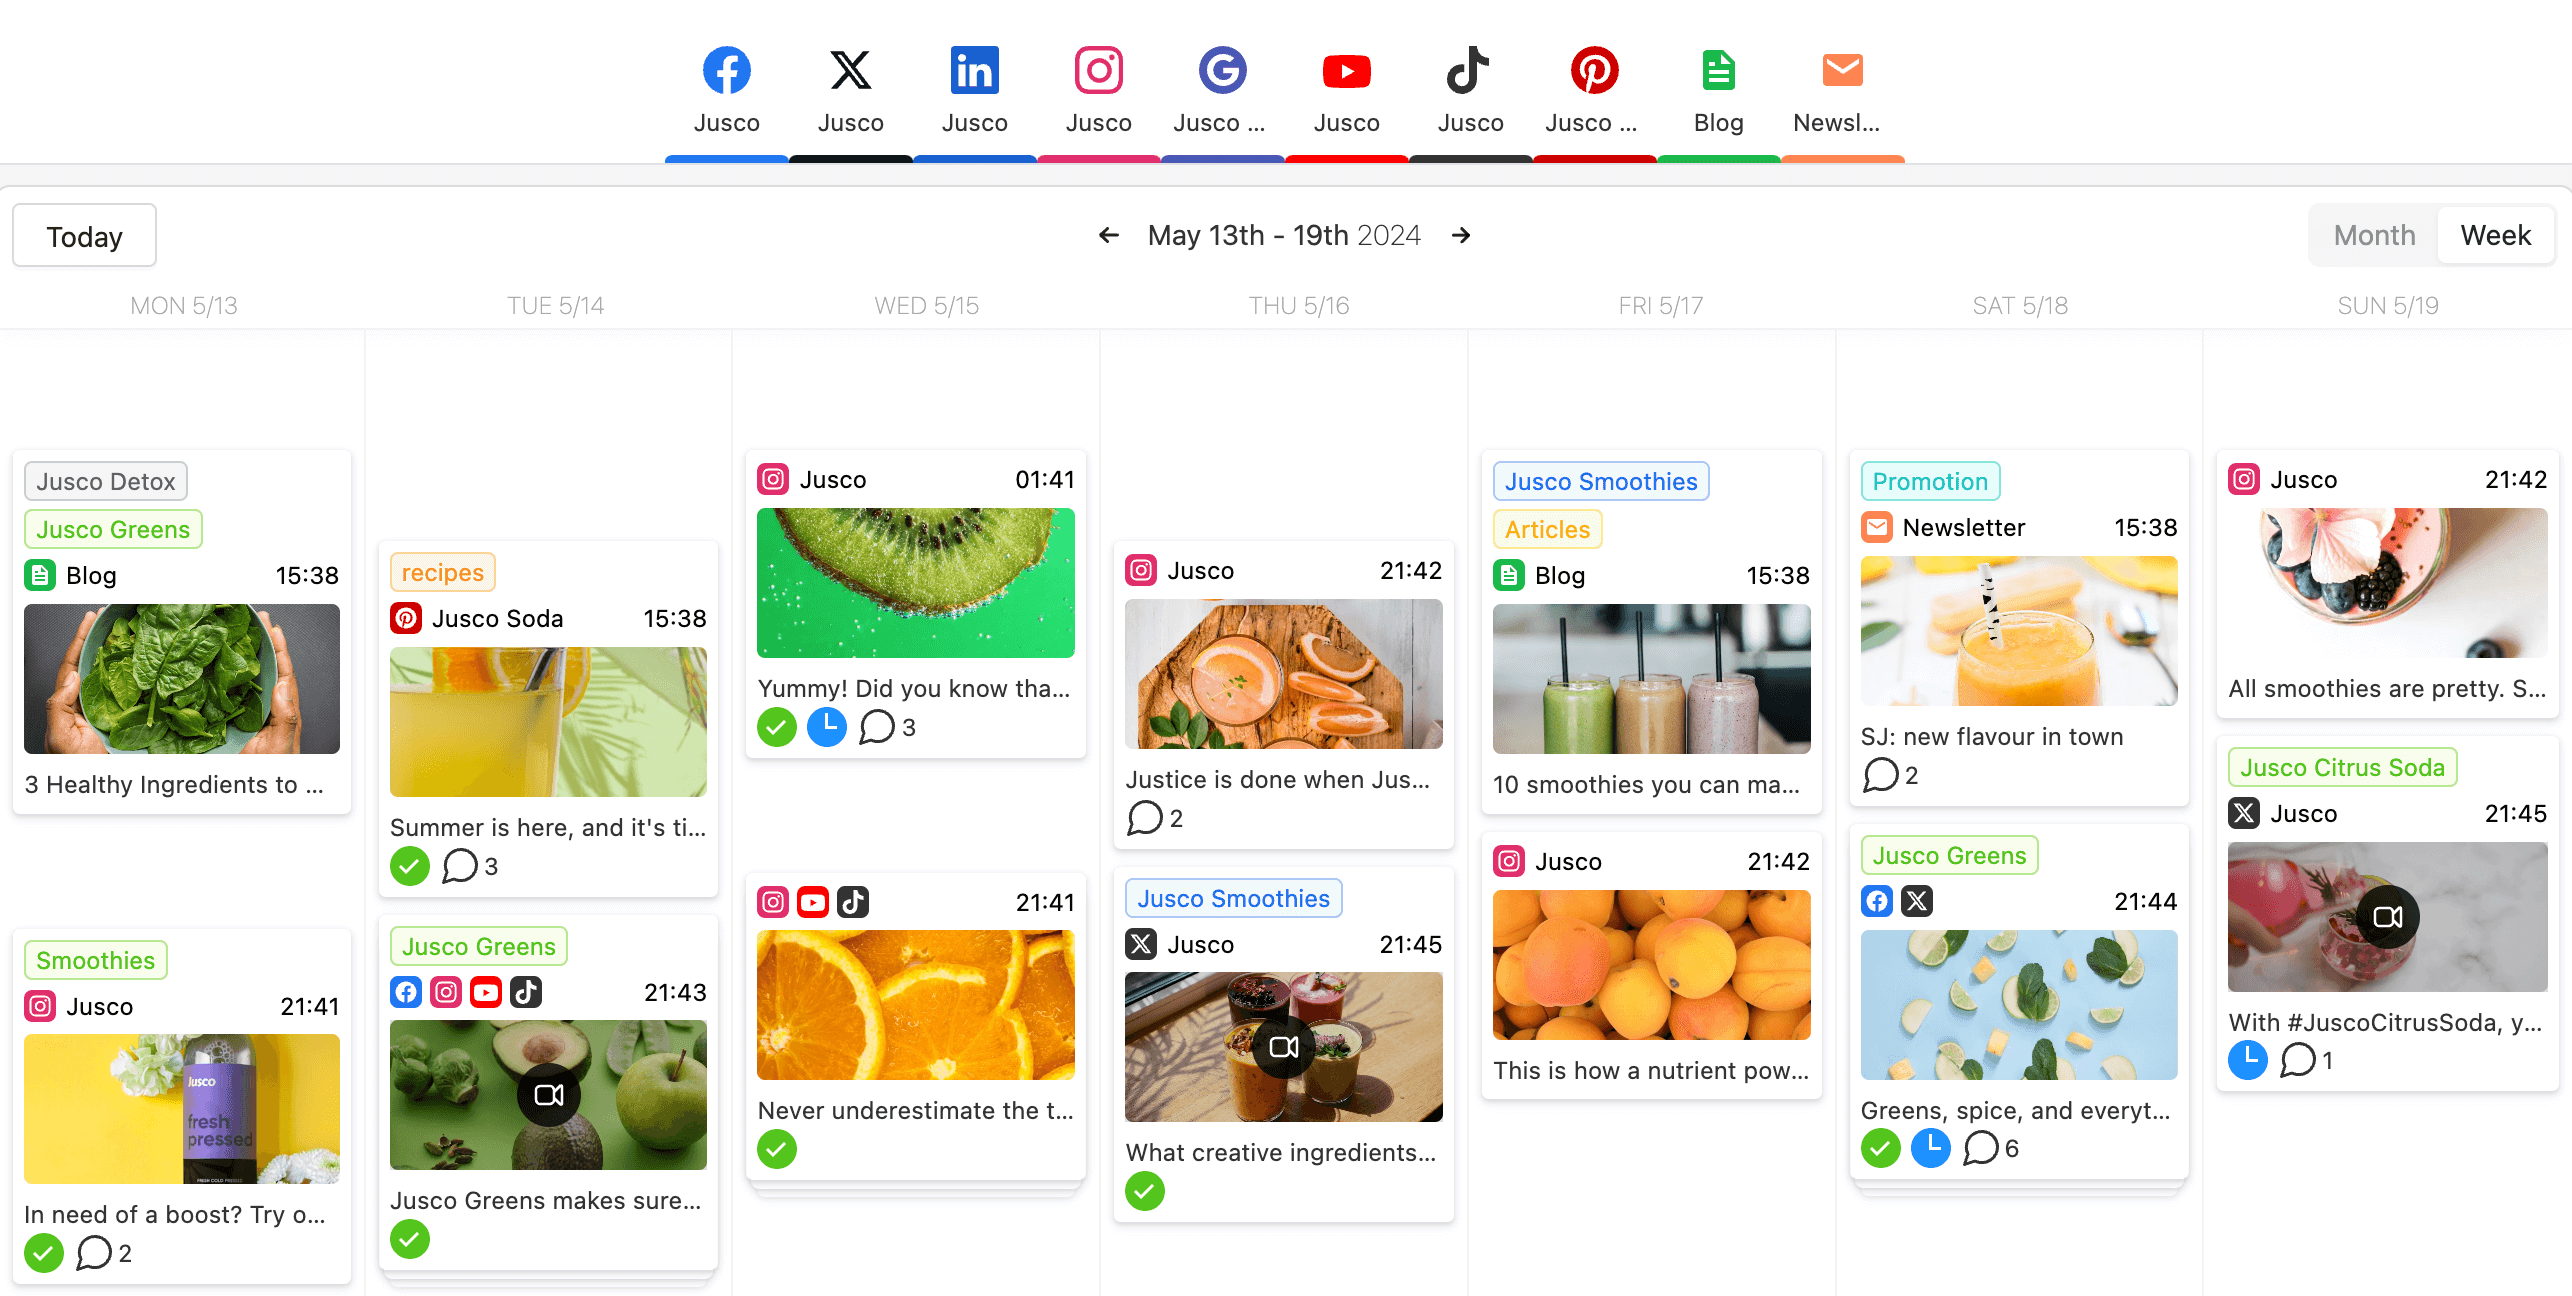 Jusco's social media content calendar, featuring posts about greens, smoothies, and soda across various platforms.